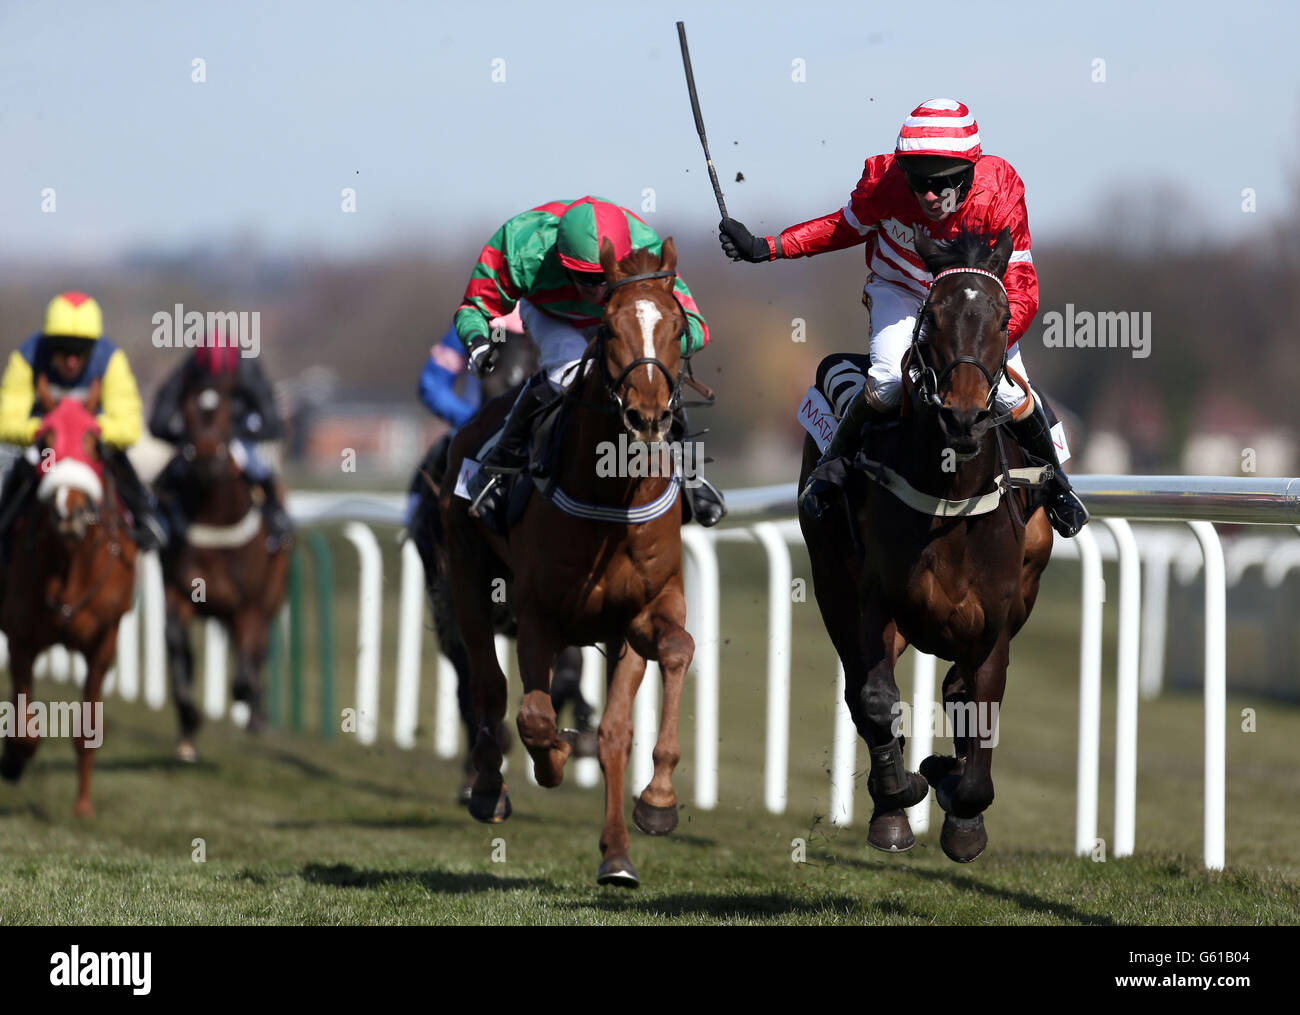 Wayne Hutchinson (right) celebrates victory on L'Unique in the Matalan Anniversary 4-Y-O Juvenile Hurdle during Grand Opening Day of the 2013 John Smith's Grand National Meeting at Aintree Racecourse, Sefton. Stock Photo